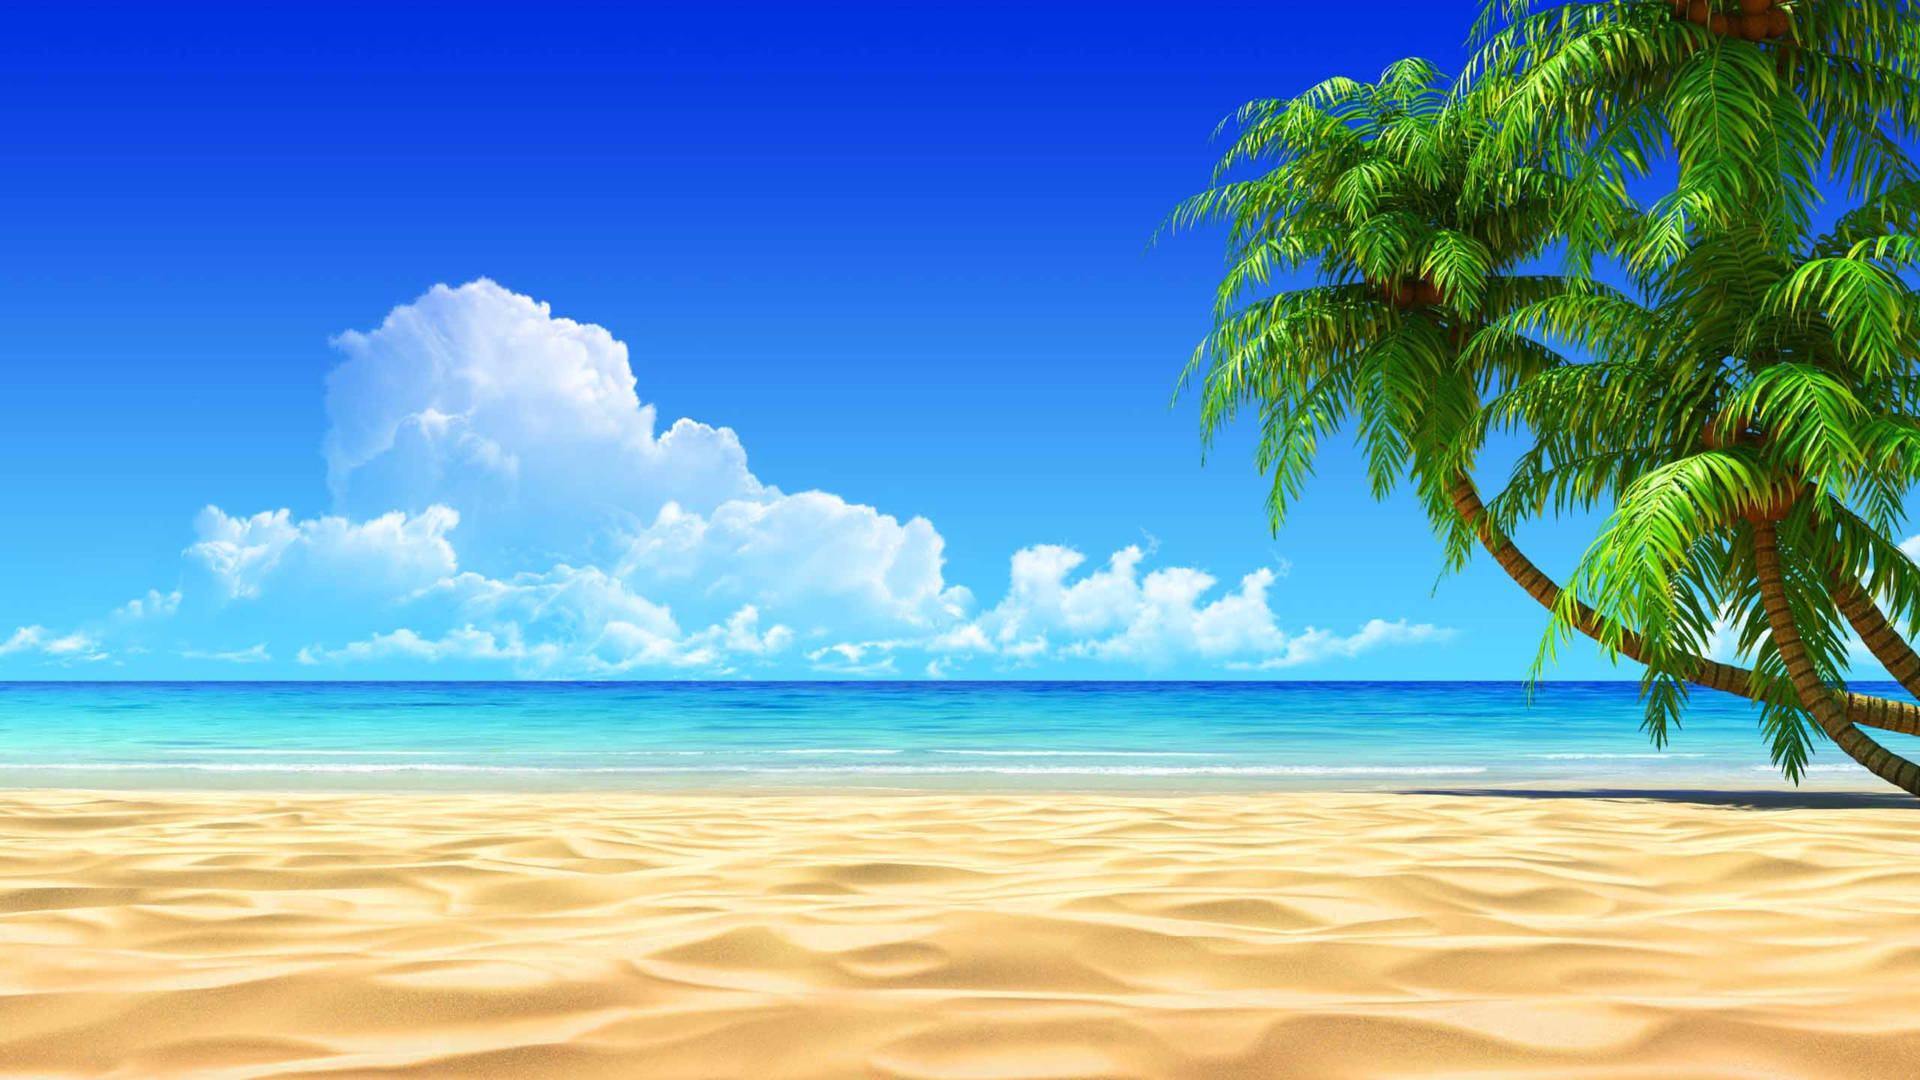 4k Beach With Pure Sand Wallpaper